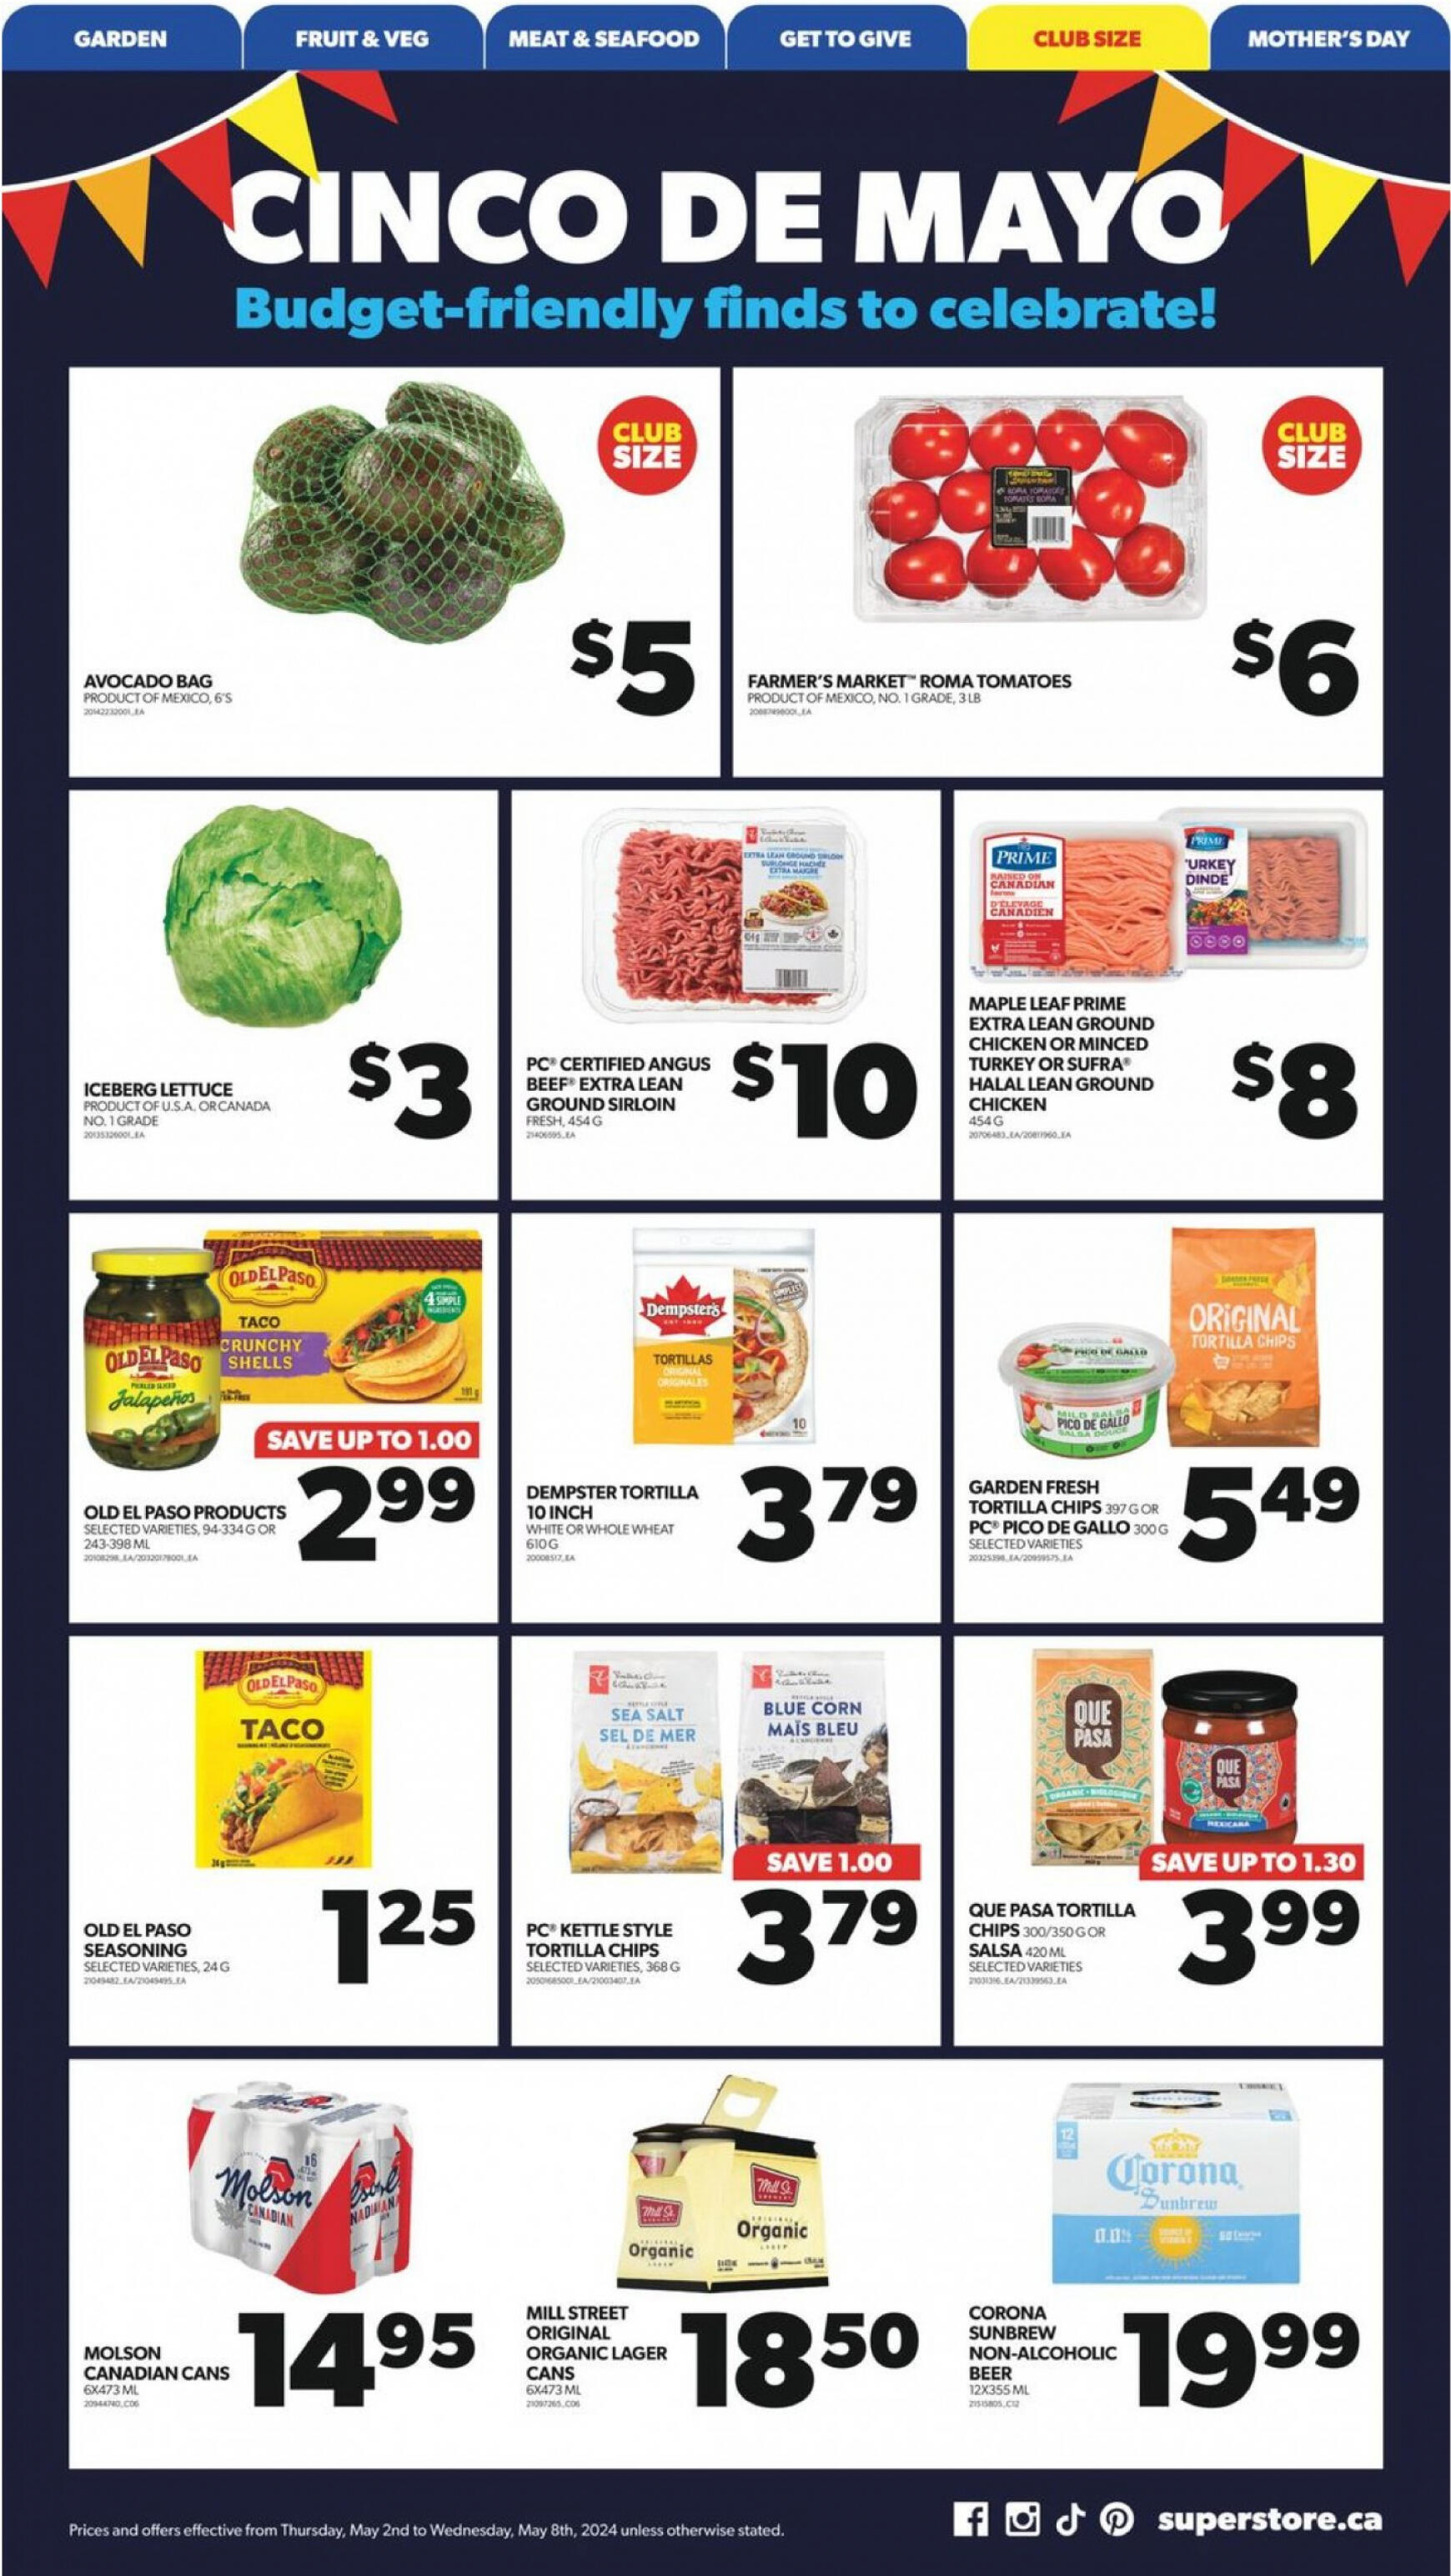 real-canadian-superstore - Real Canadian Superstore flyer current 02.05. - 08.05. - page: 6